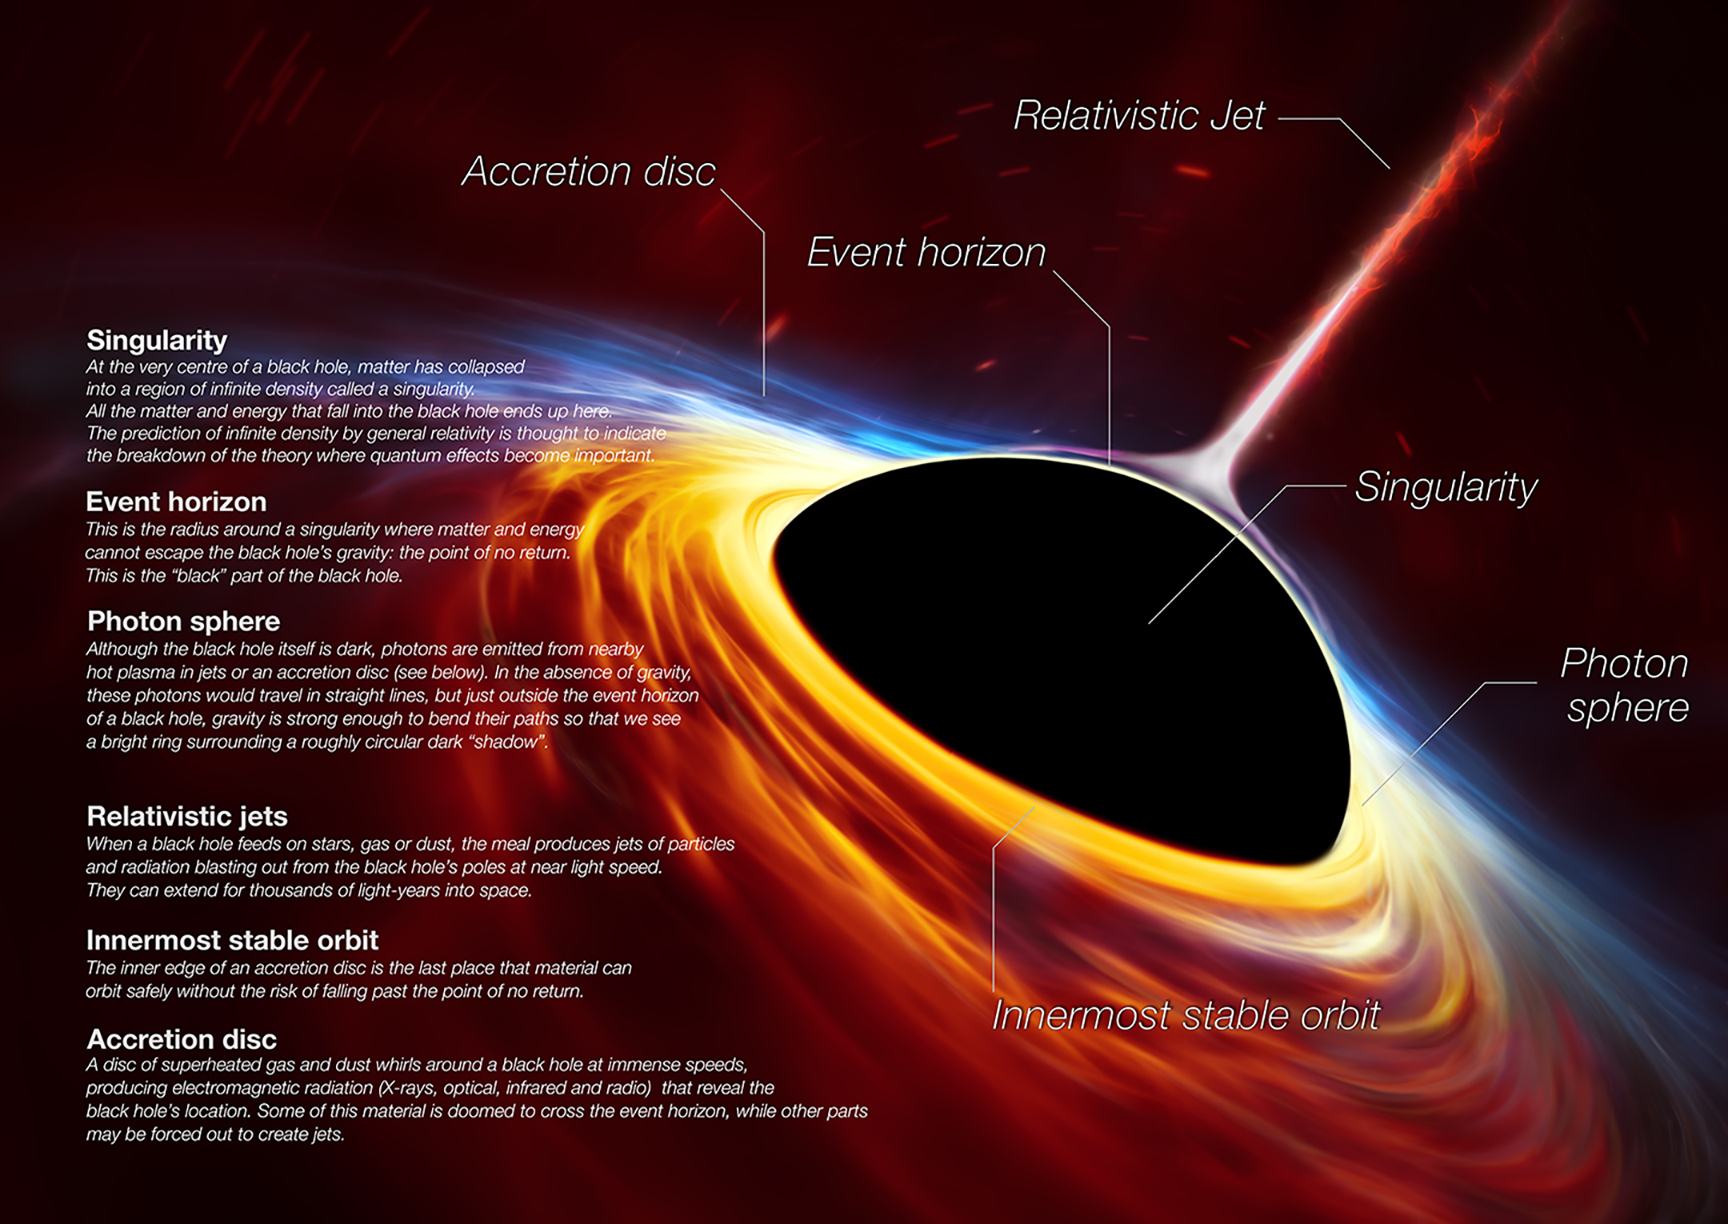 This artist's impression depicts a rapidly spinning supermassive black hole surrounded by an accretion disc. The black hole is labeled, showing the anatomy of this fascinating object.